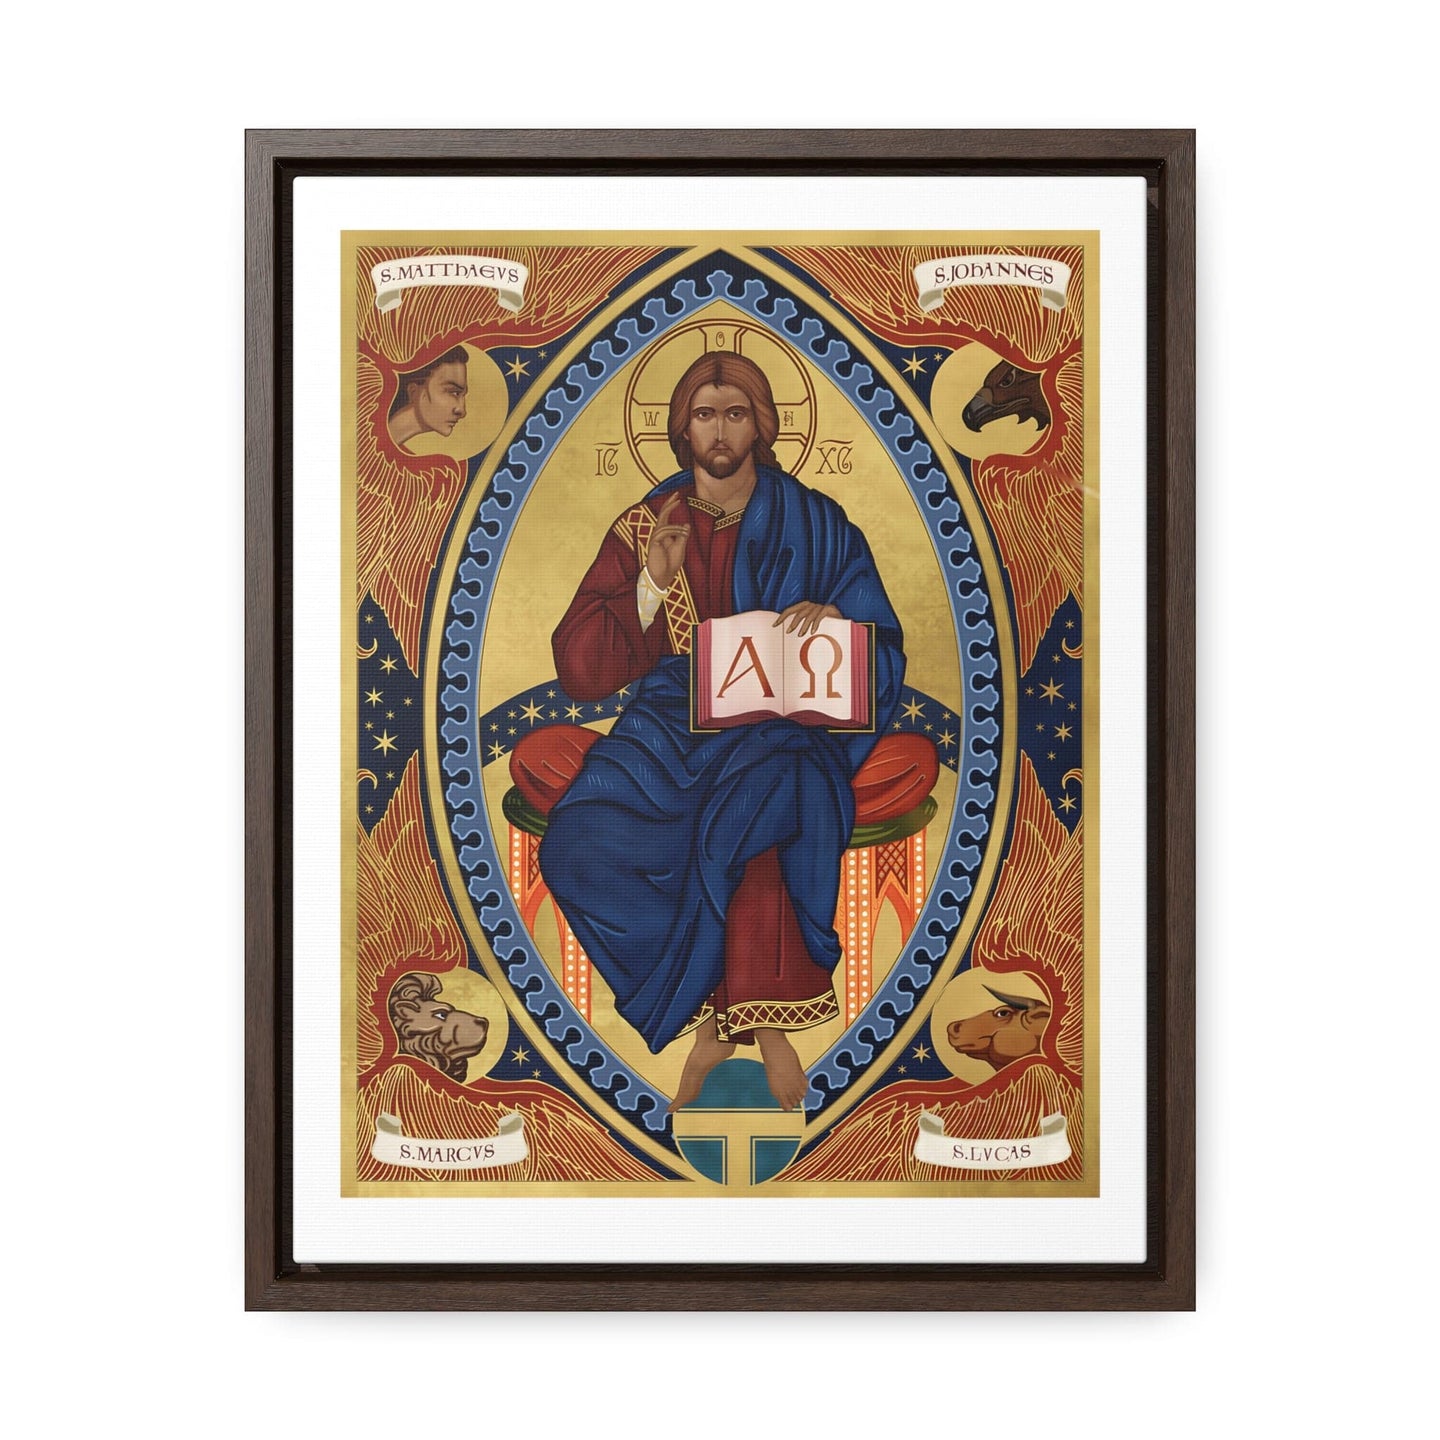 Christ In Majesty Premium Gallery Canvas Wall Print